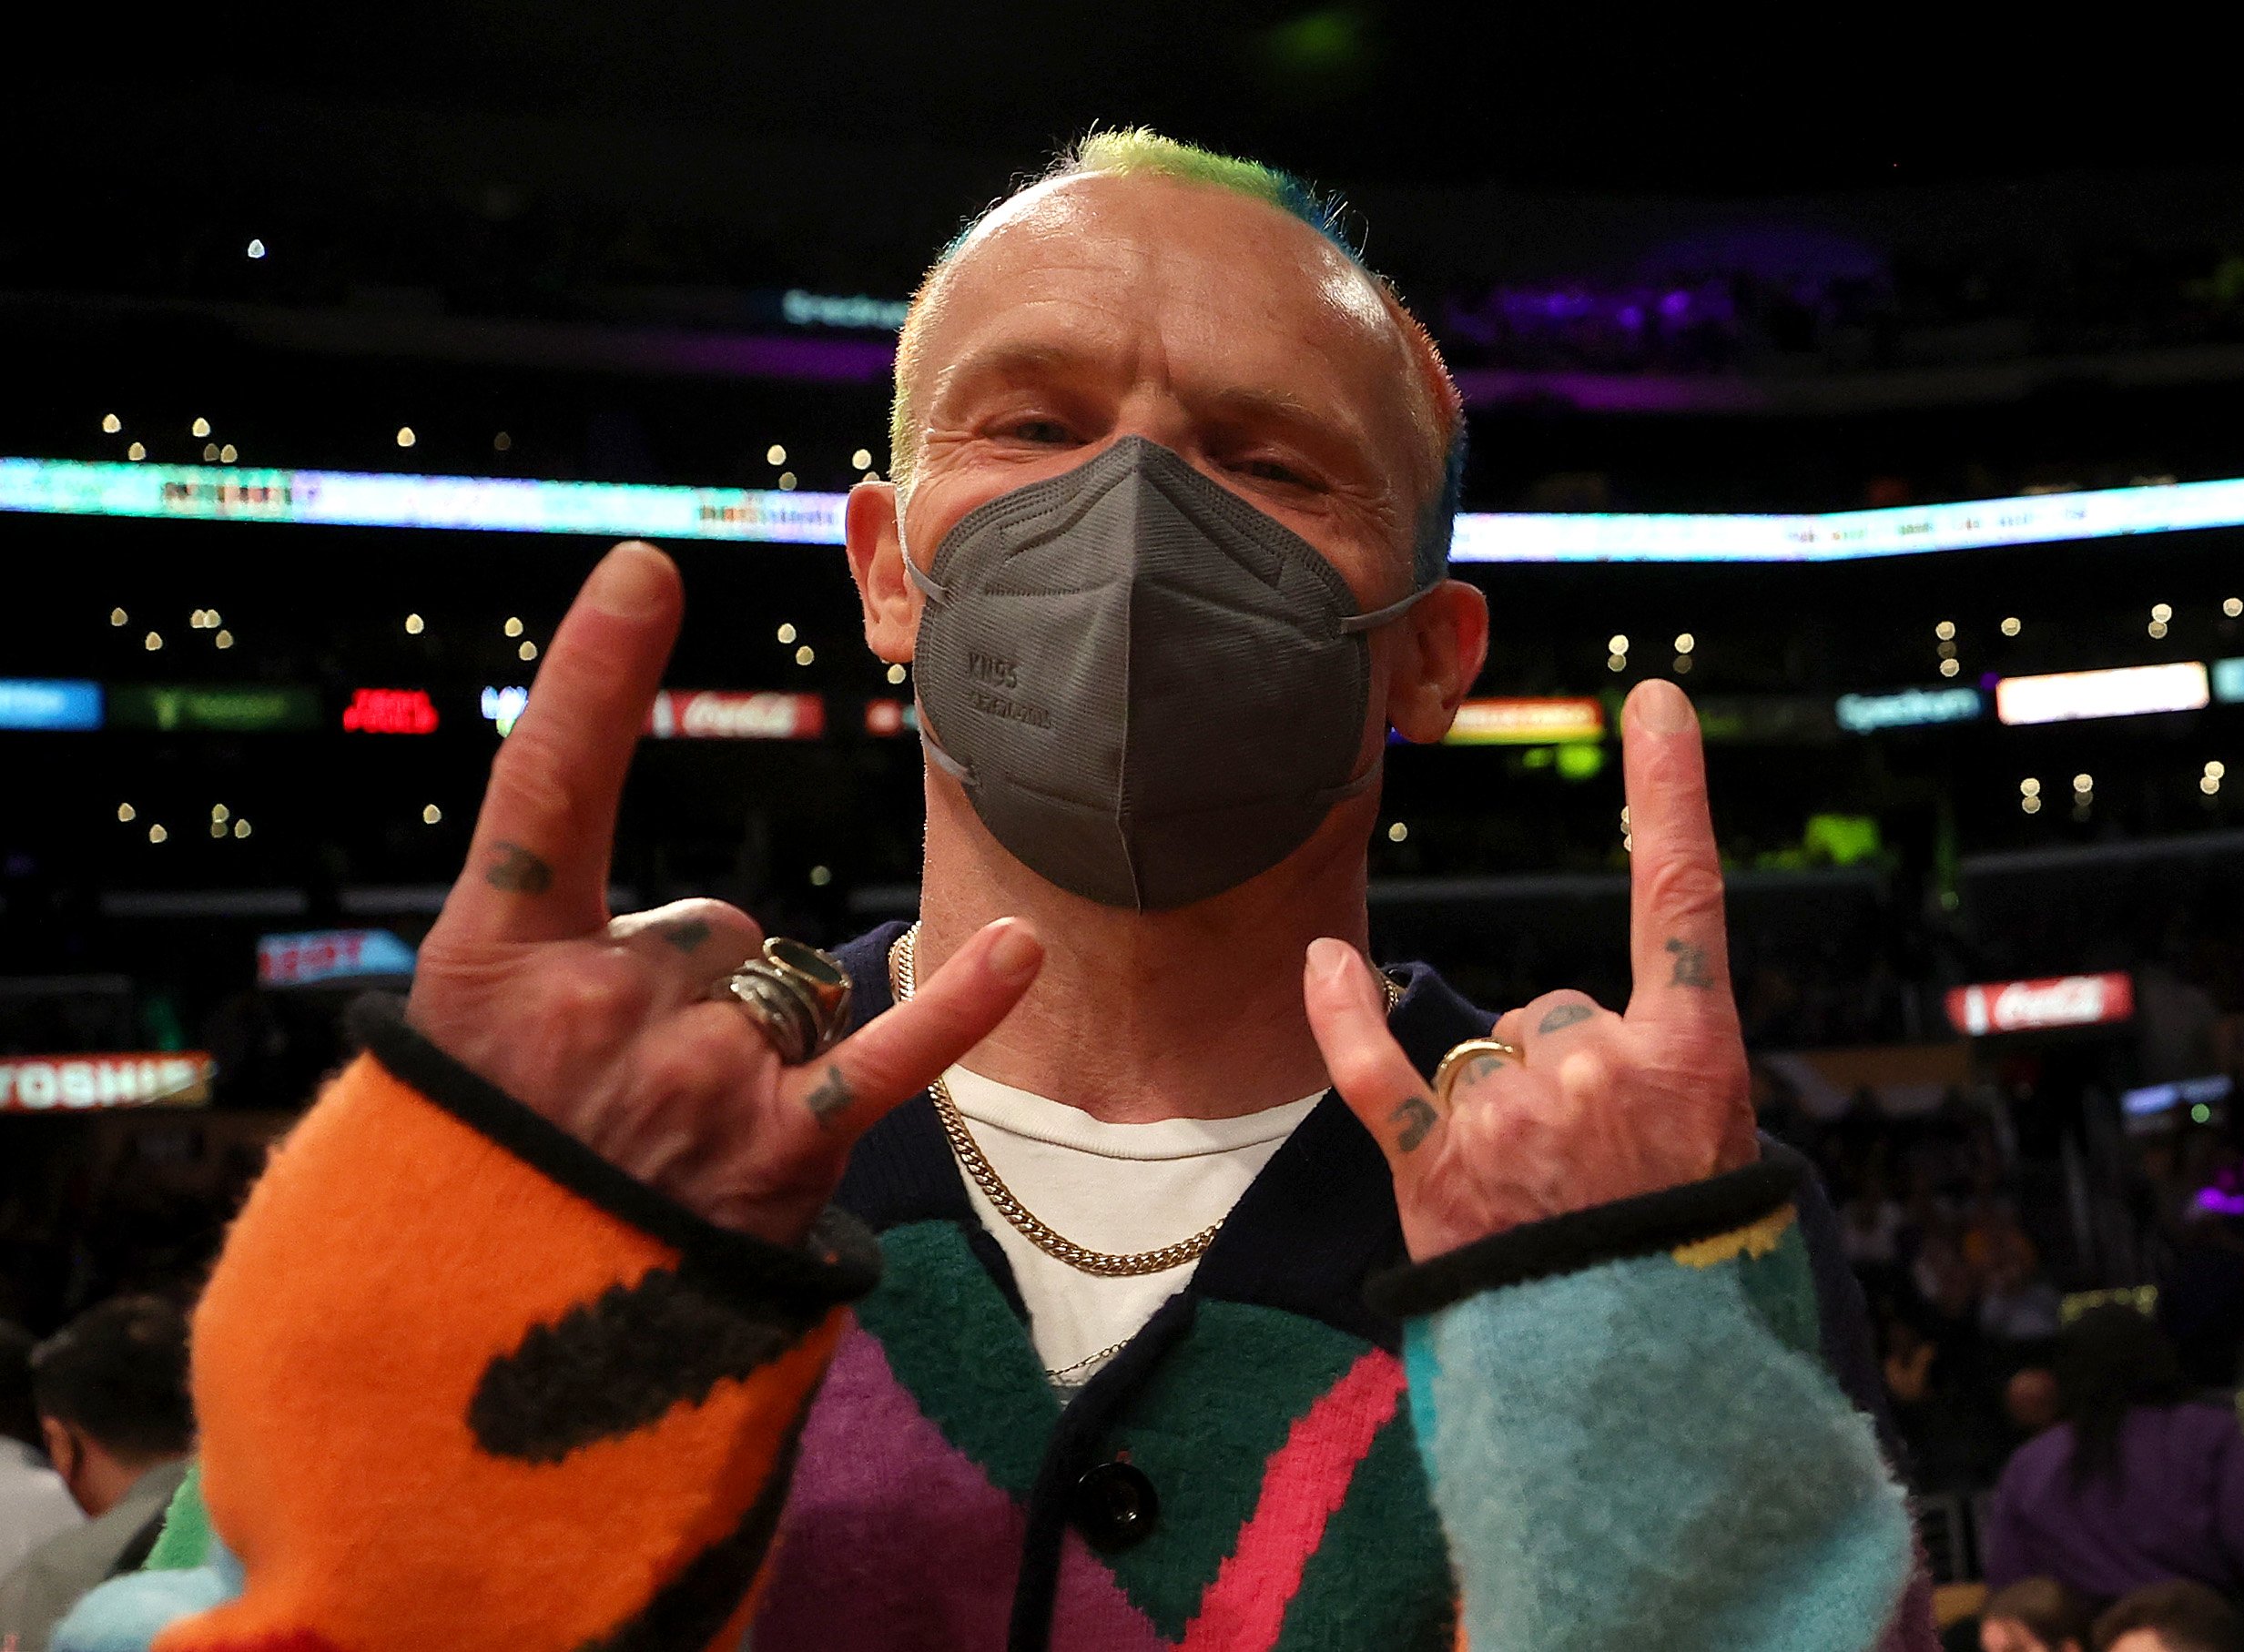 Red Hot Chili Peppers bassist Flea giving the Westside sign at a Los Angeles Lakers game